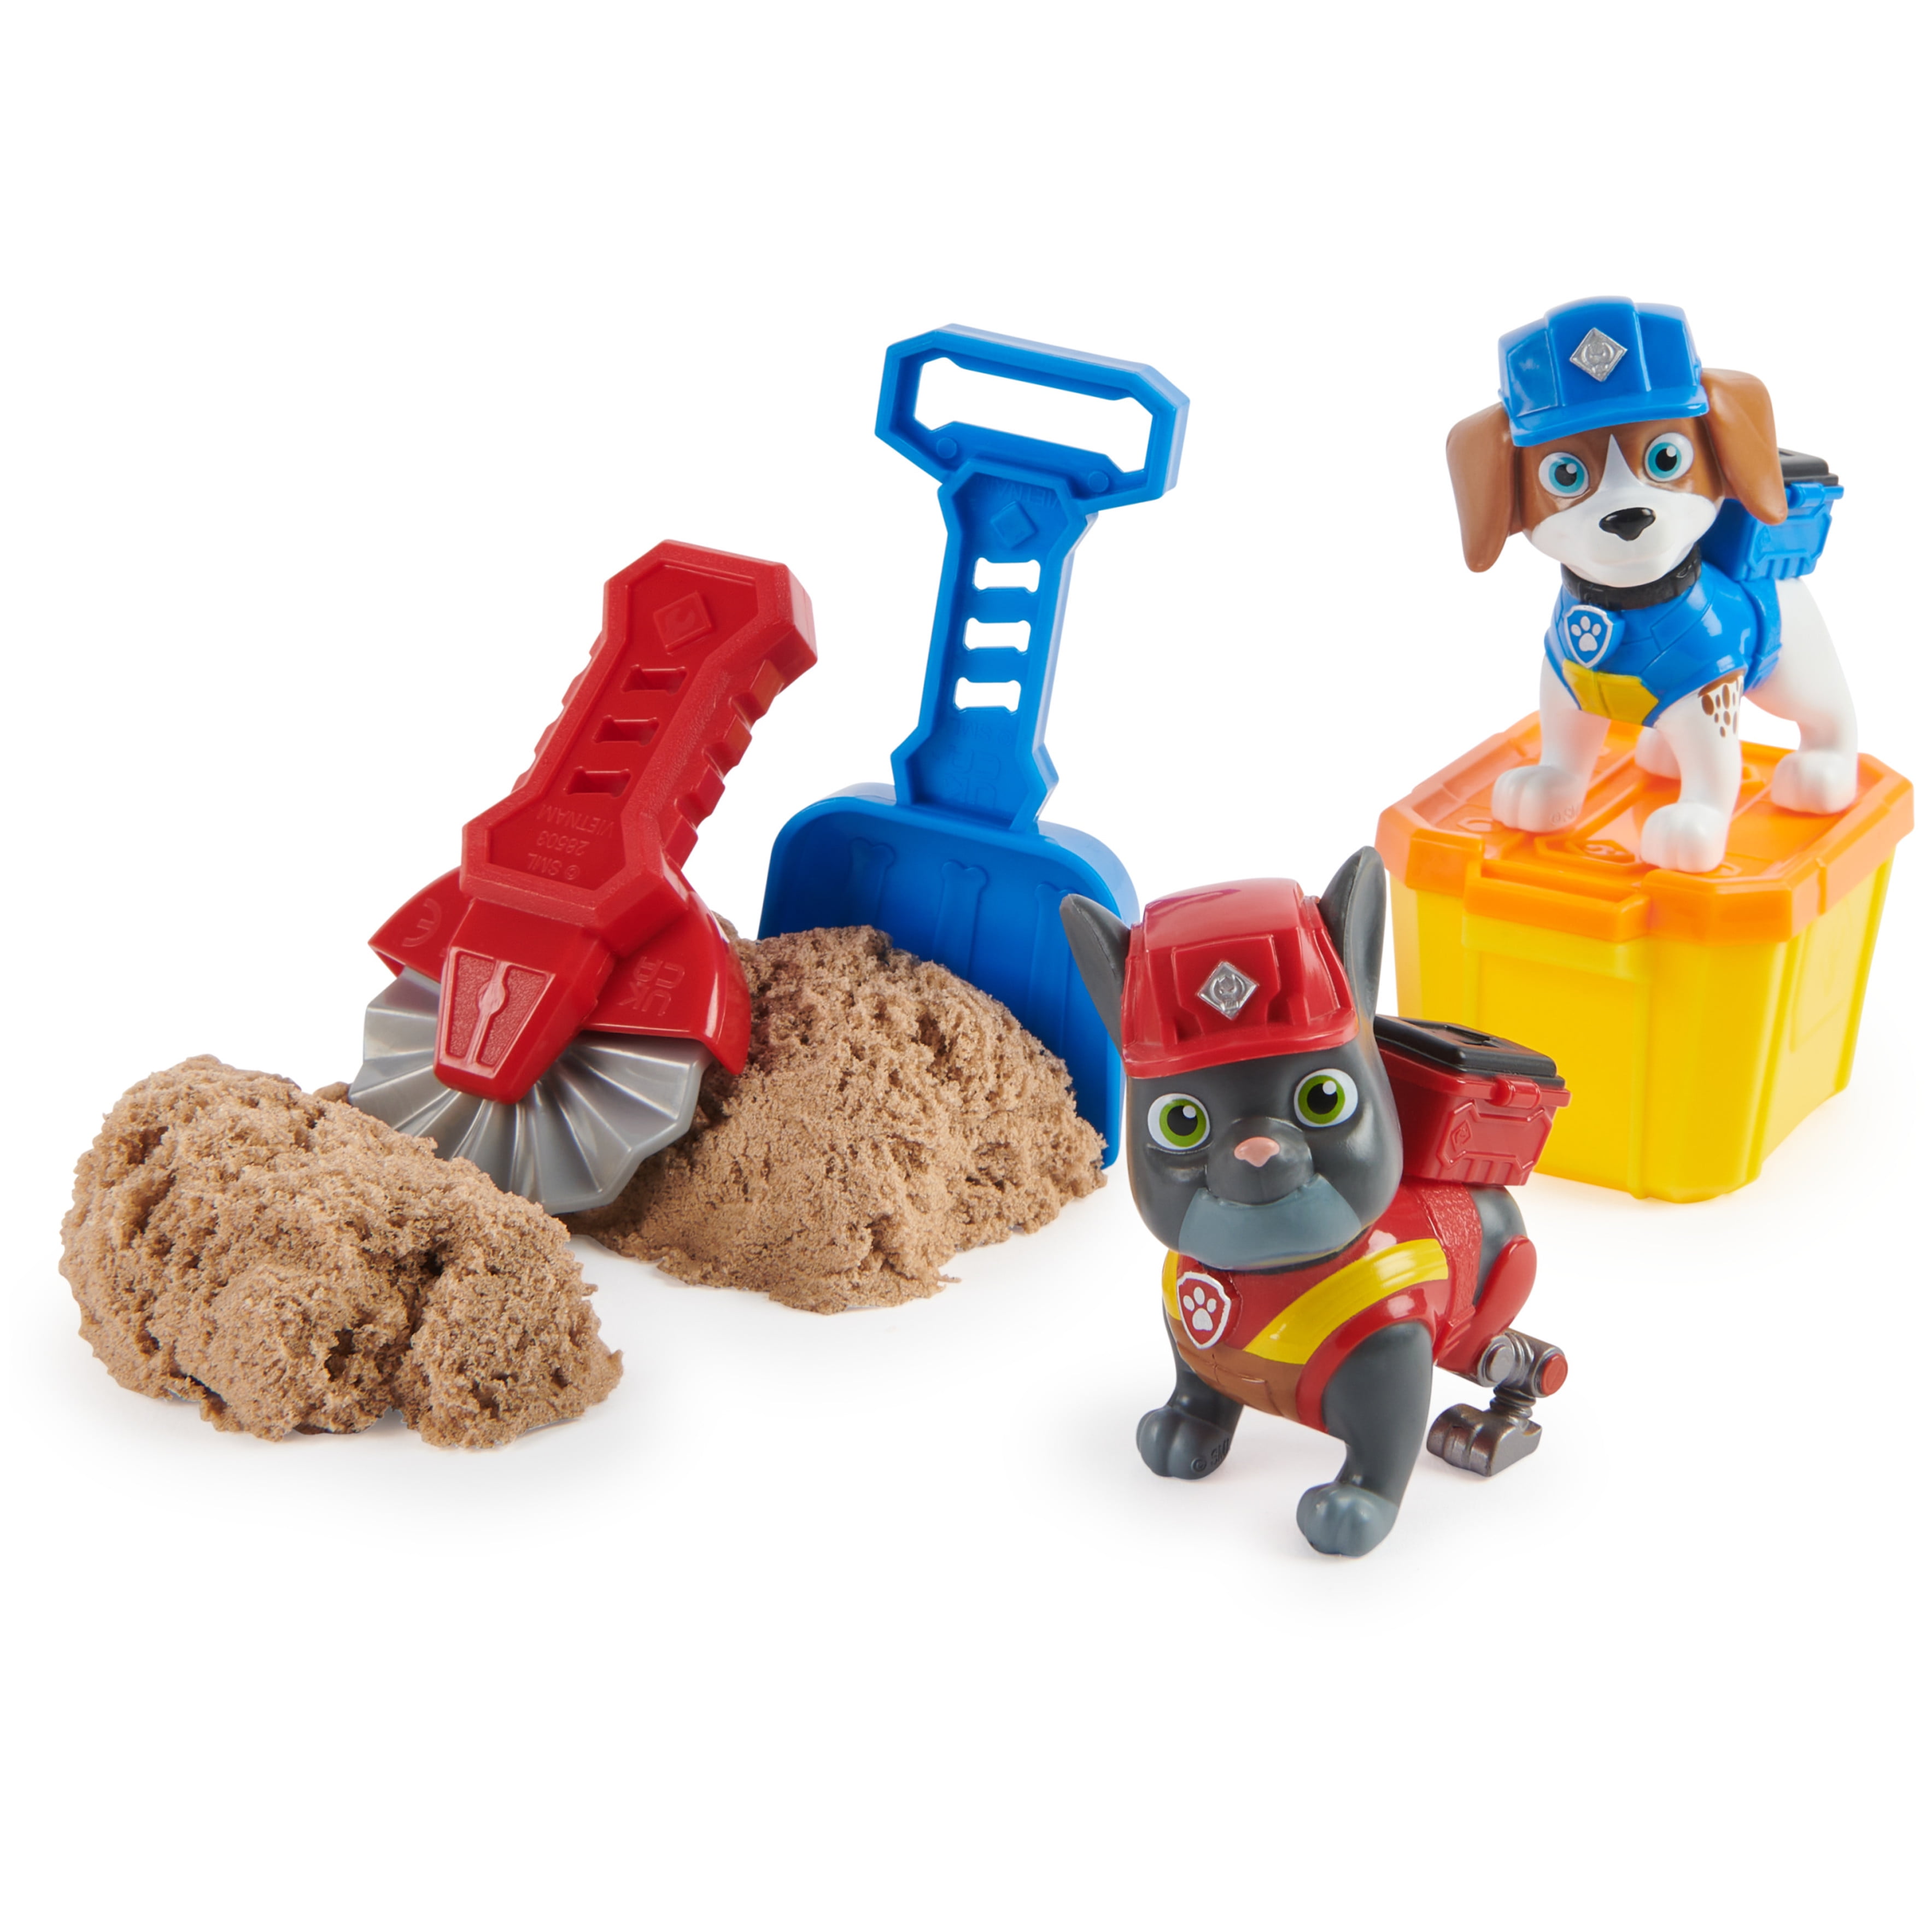 Rubble & Crew, Wheeler and Charger Figures, Kinetic Build-It Sand and Tools for Kids 3+